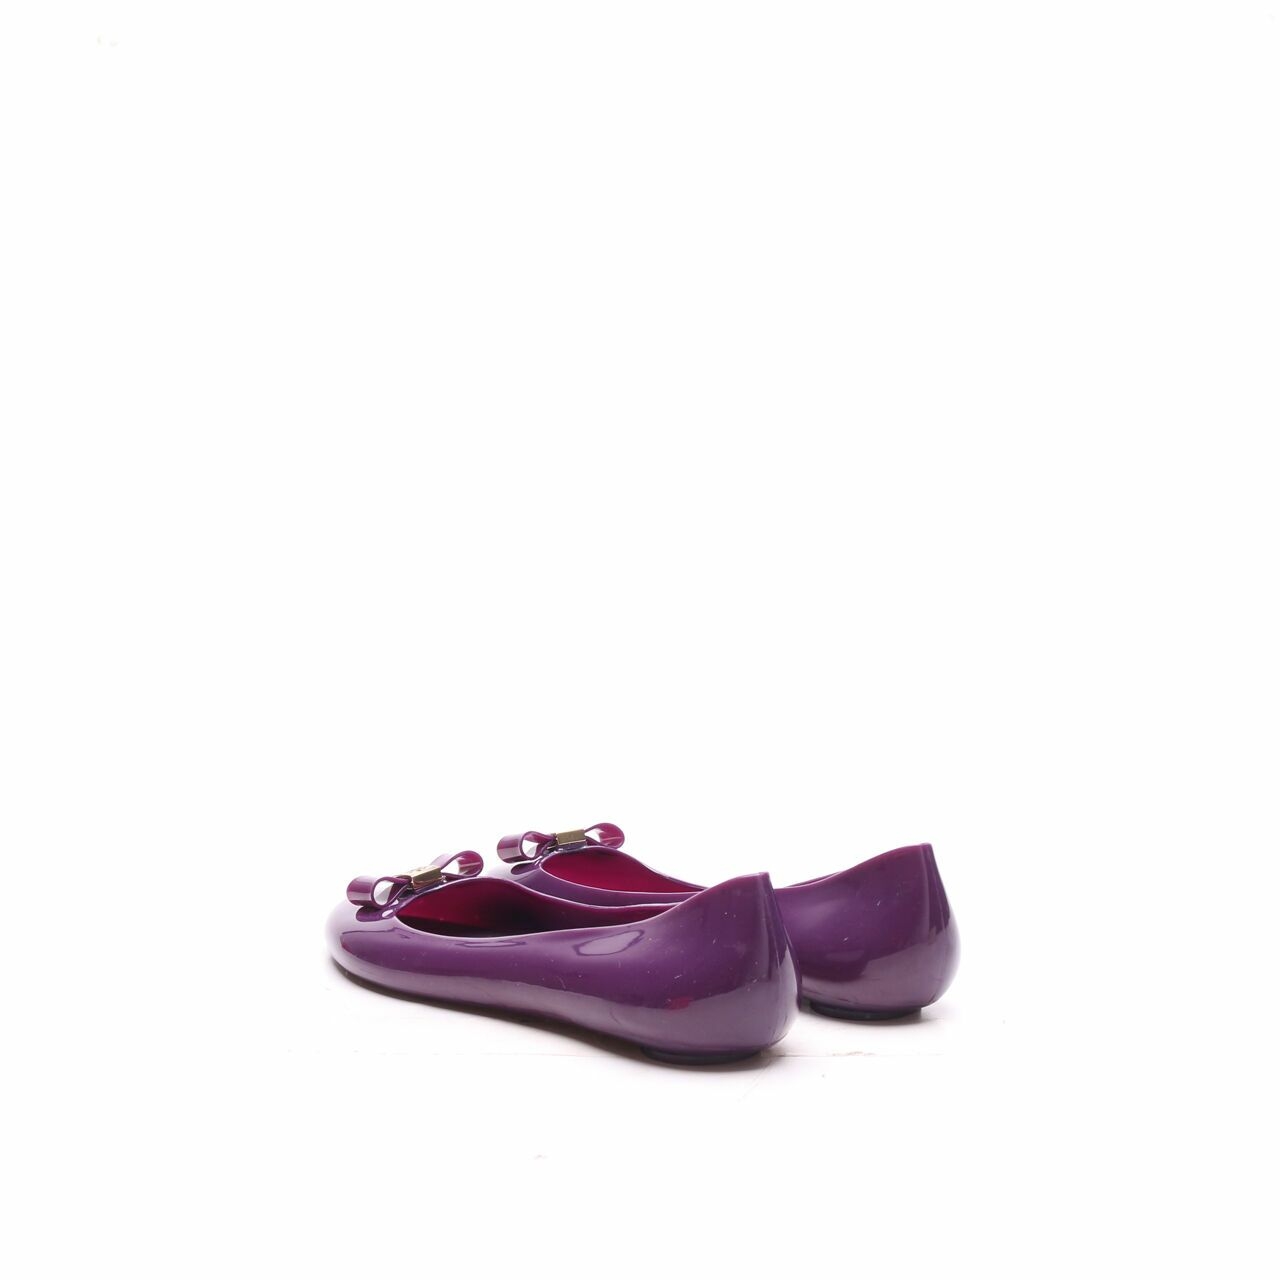 Tory Burch Jelly Ballet with Bow Sweet Plum Purple Flats Shoes